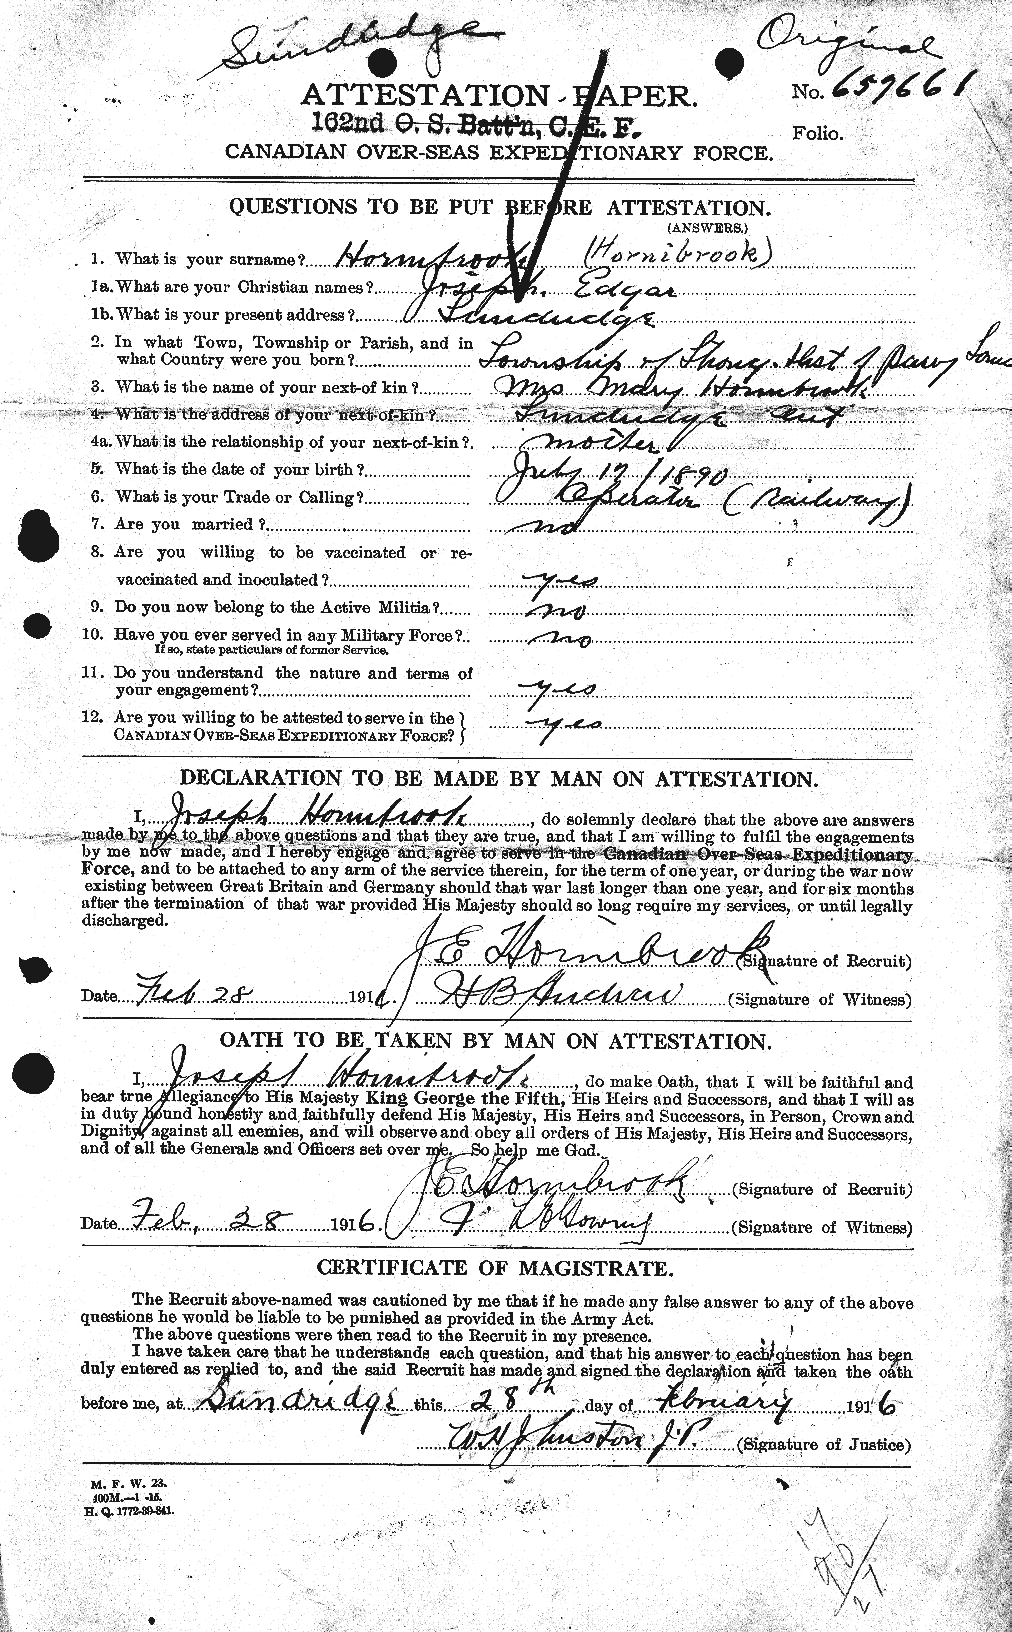 Personnel Records of the First World War - CEF 400801a